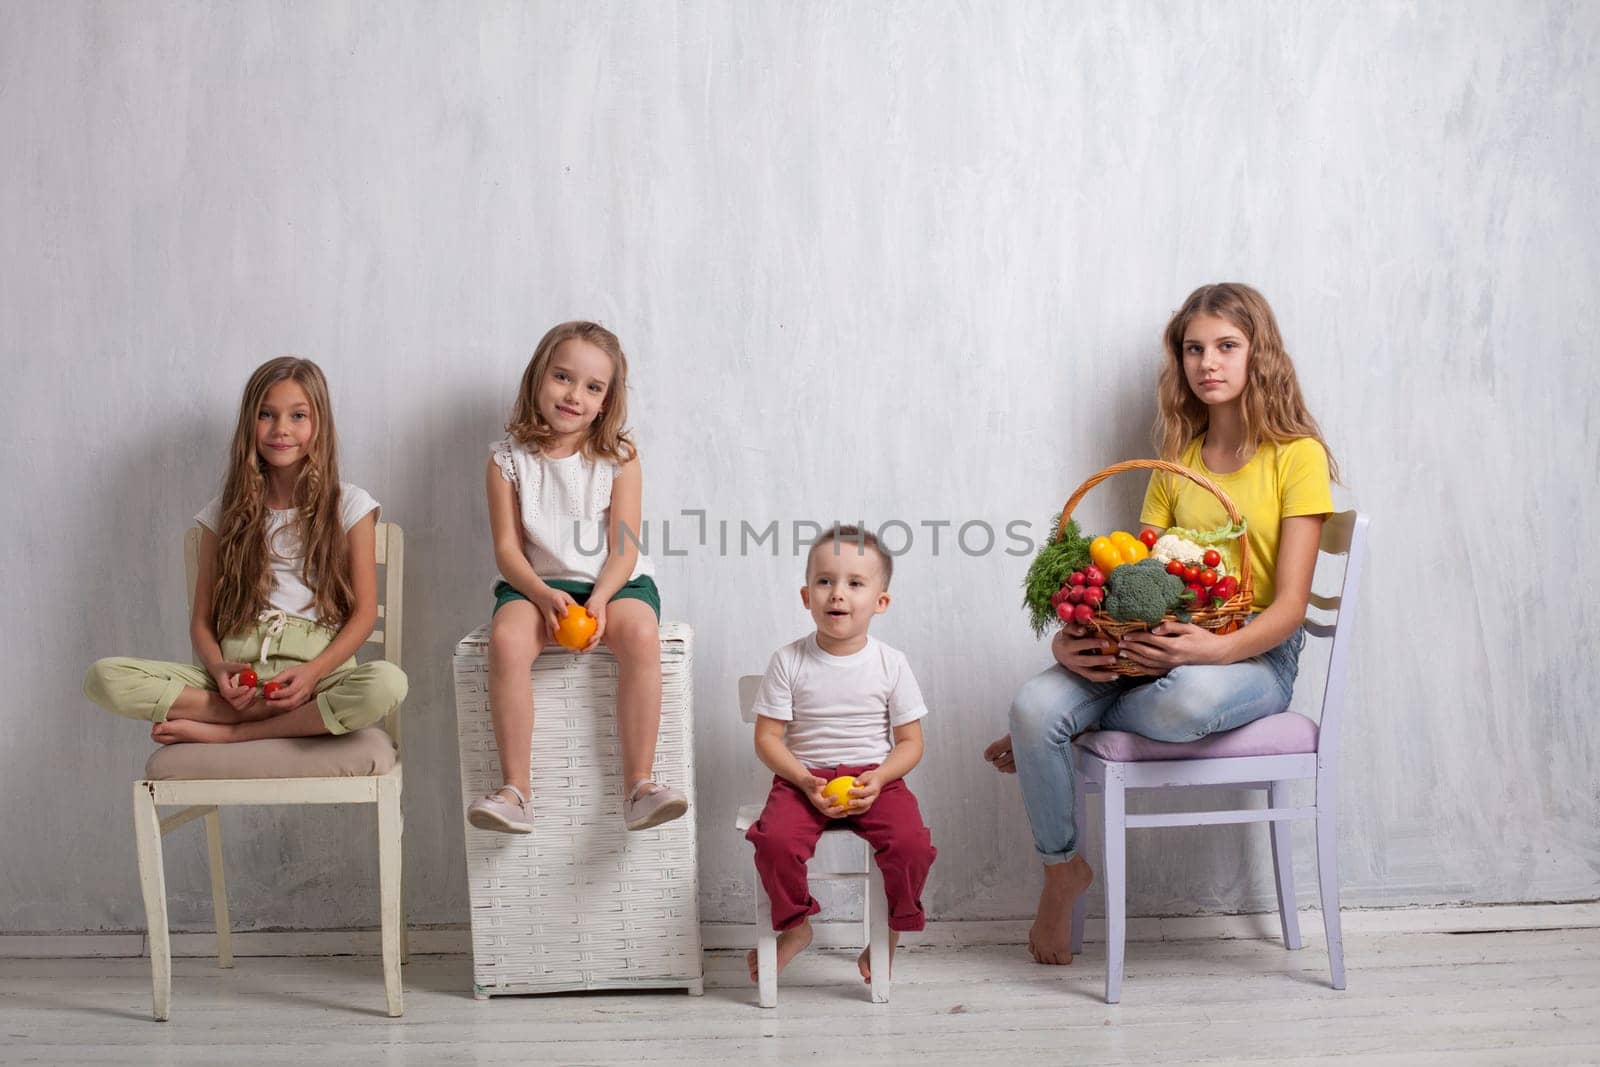 Girls and boy hold vegetables and fruits